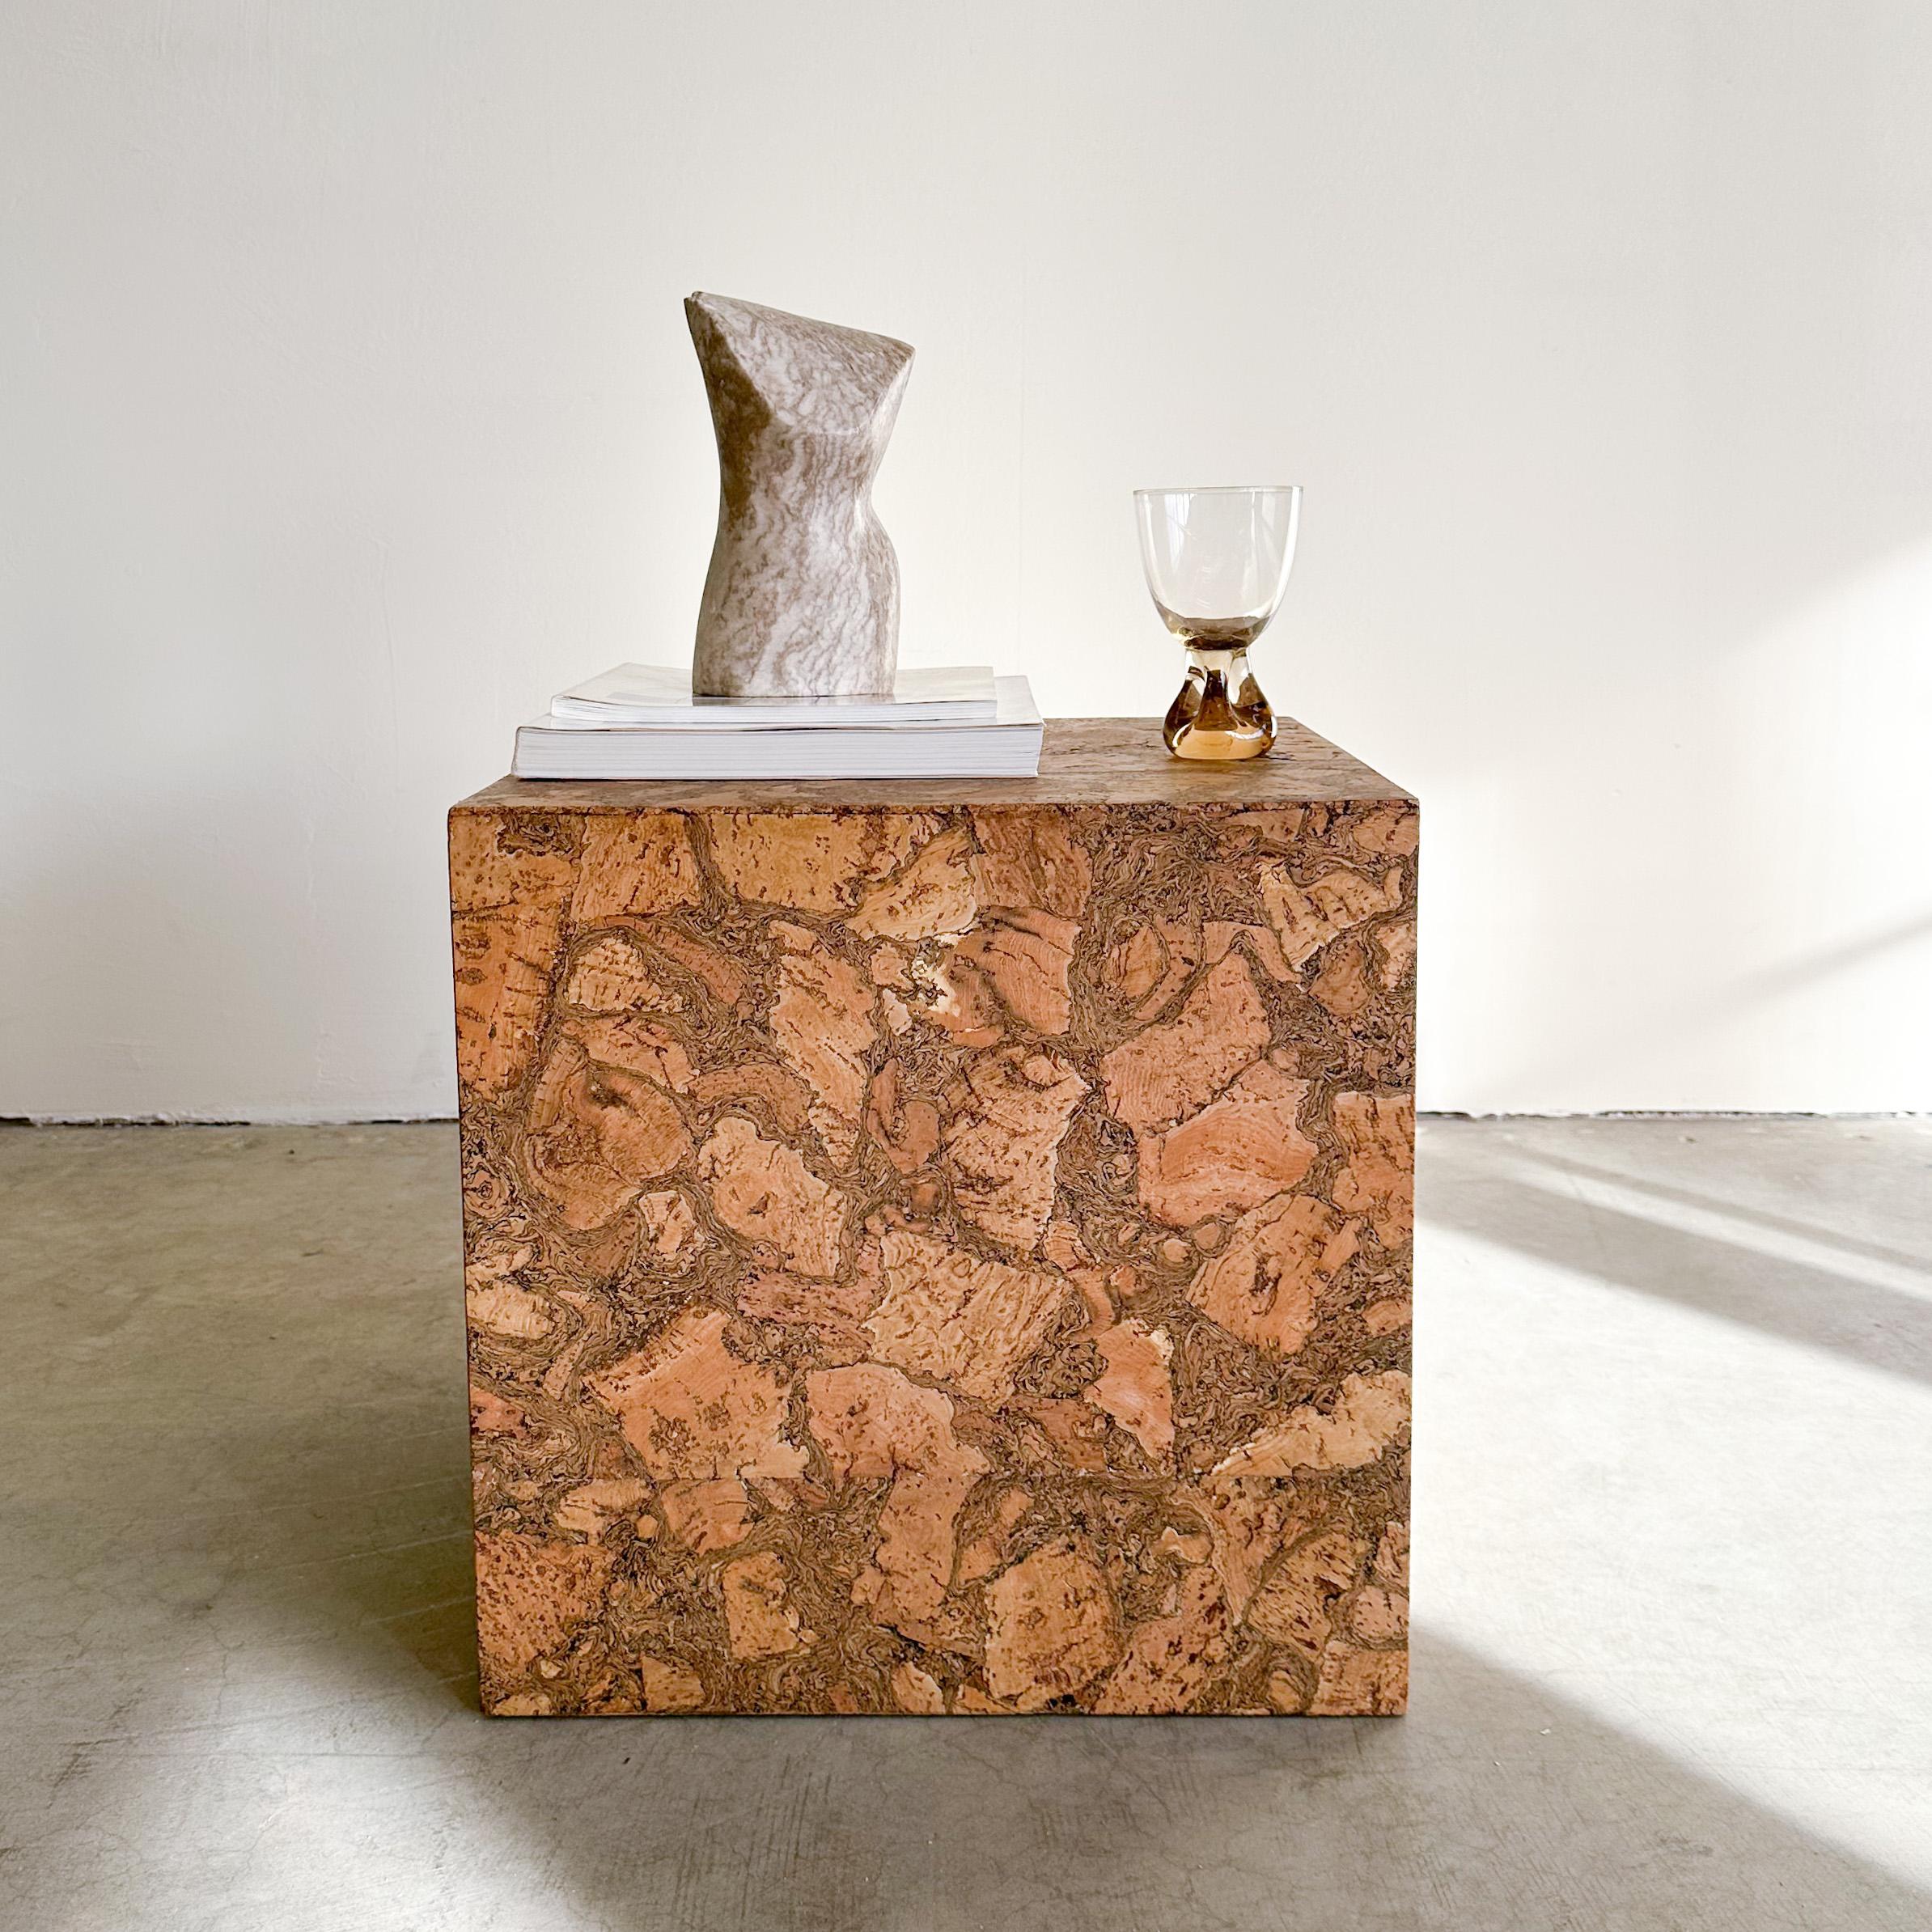 Vintage Cork Square Cube End Table.

The table is made out of cork veneer & wood.

Color: Natural Cork

Measurements:
Length: 16 1/4